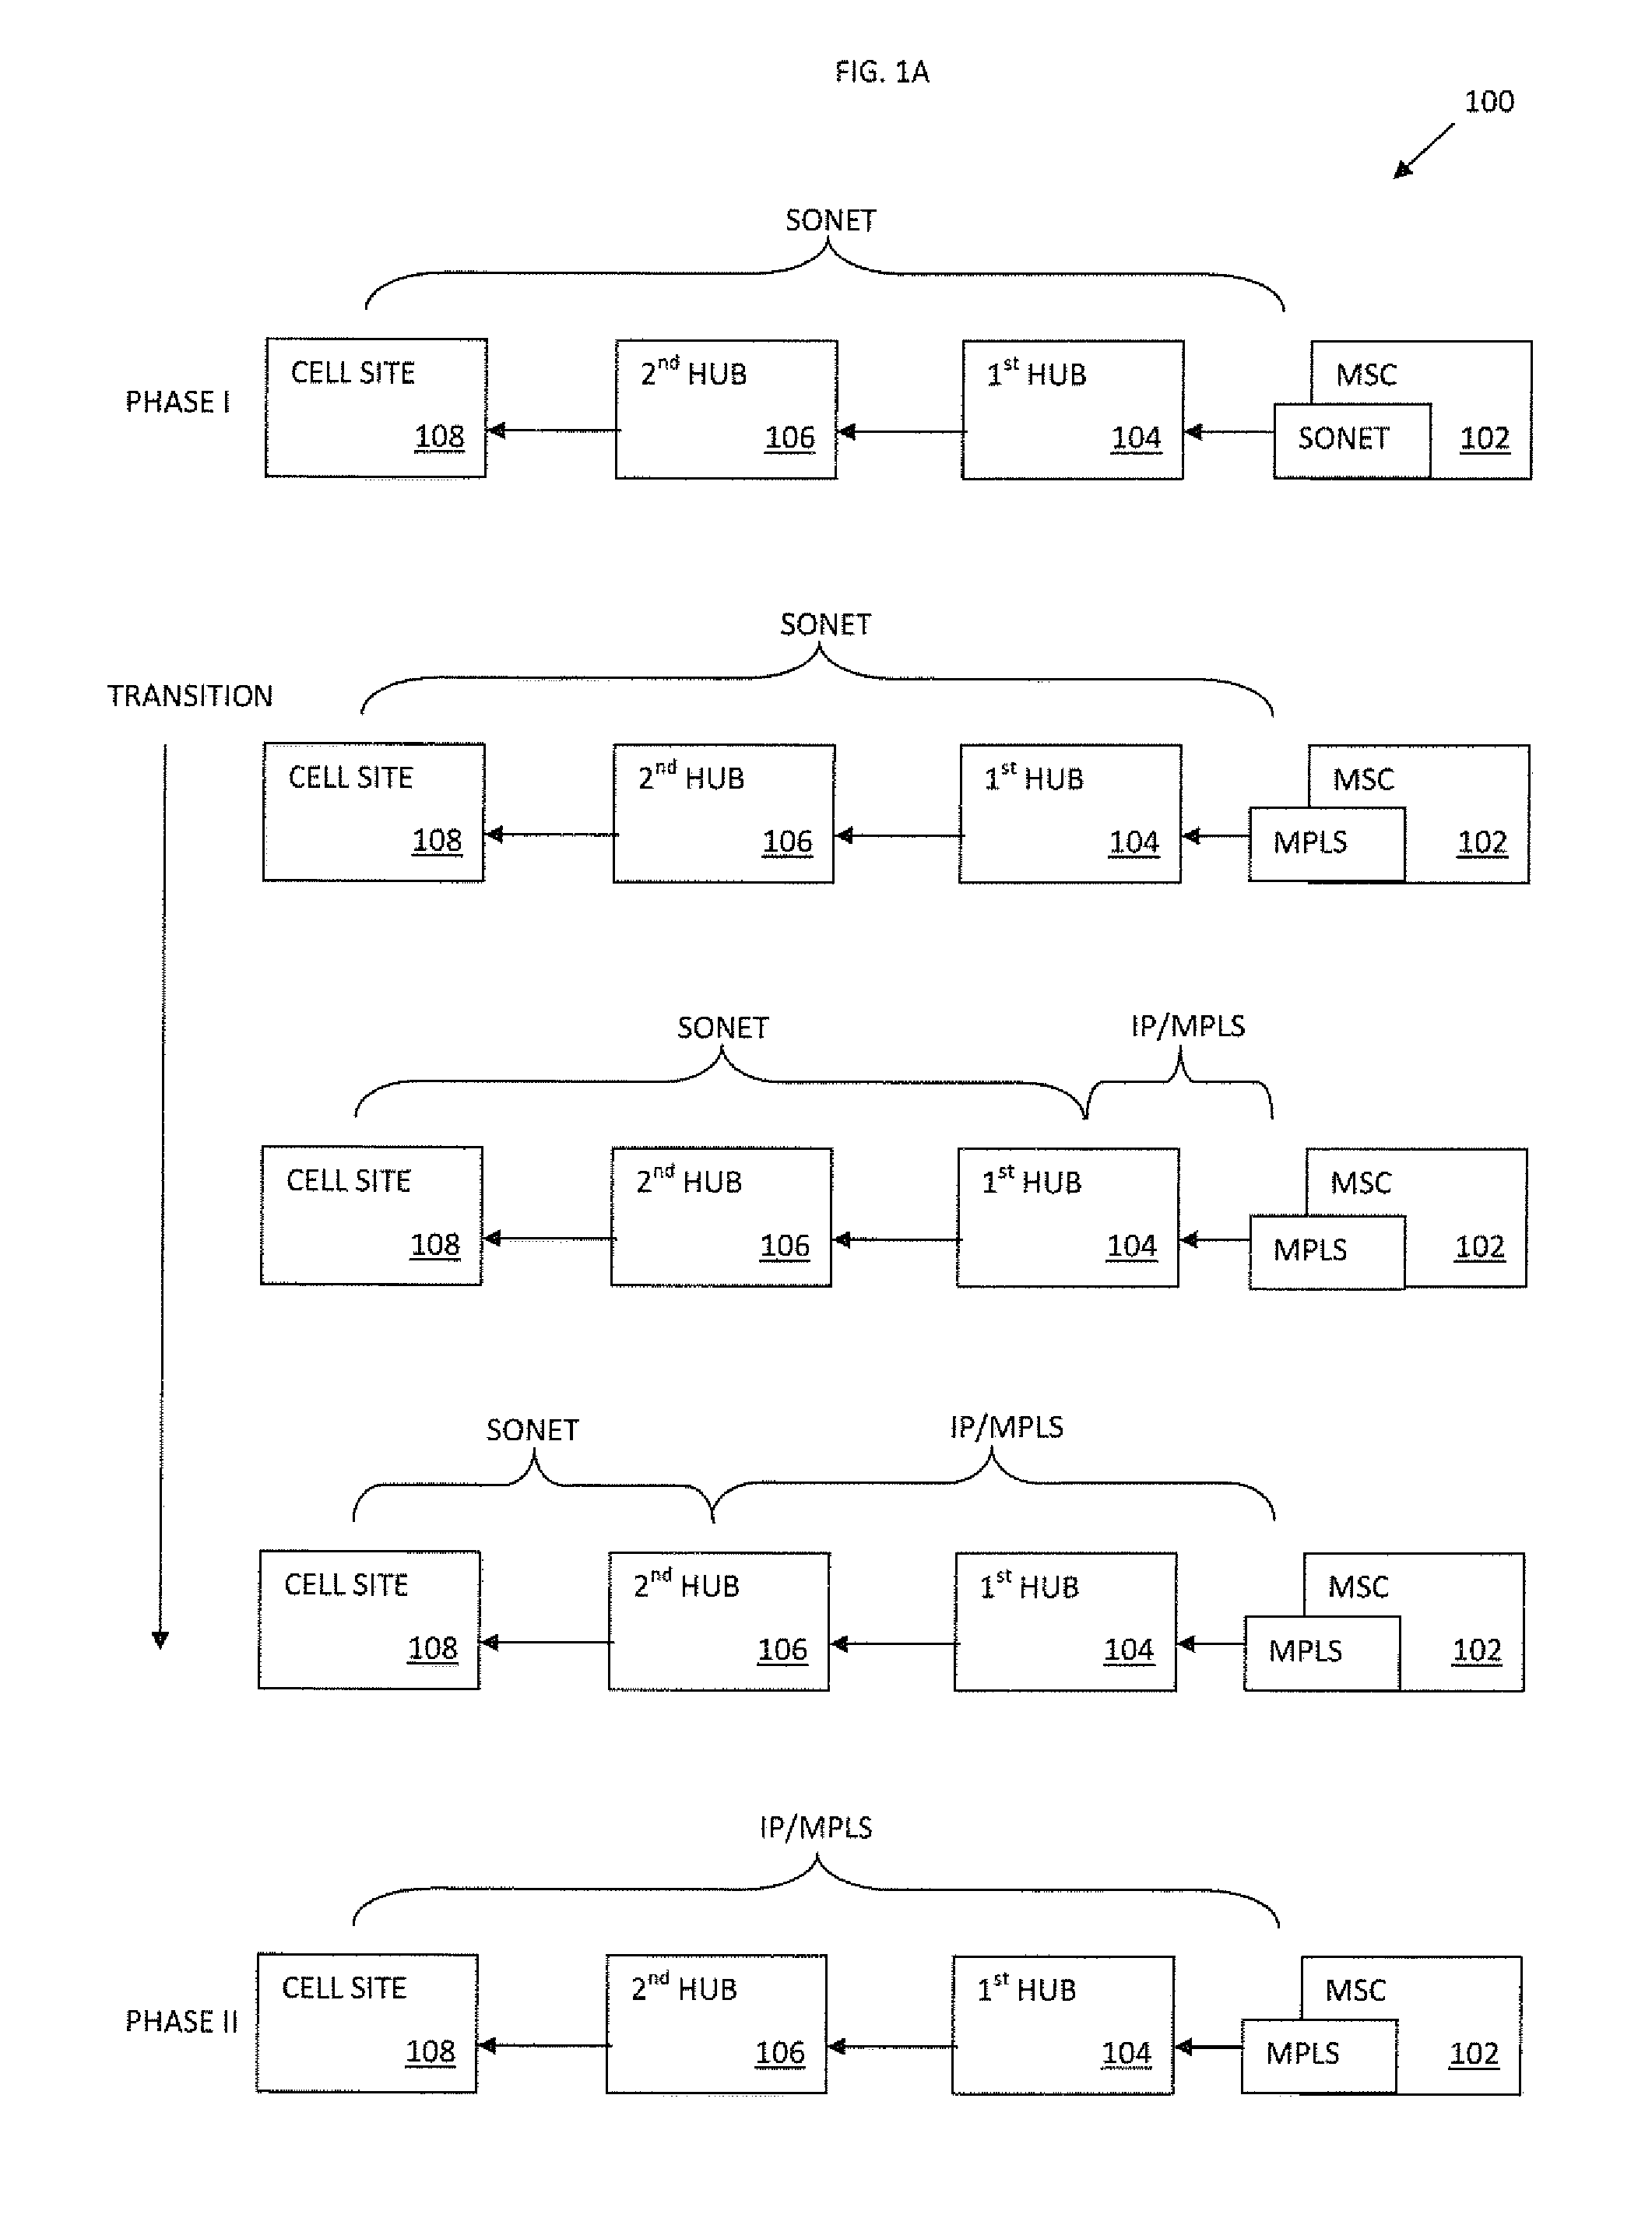 Apparatus and methods for intelligent deployment of network infrastructure based on tunneling of ethernet ring protection